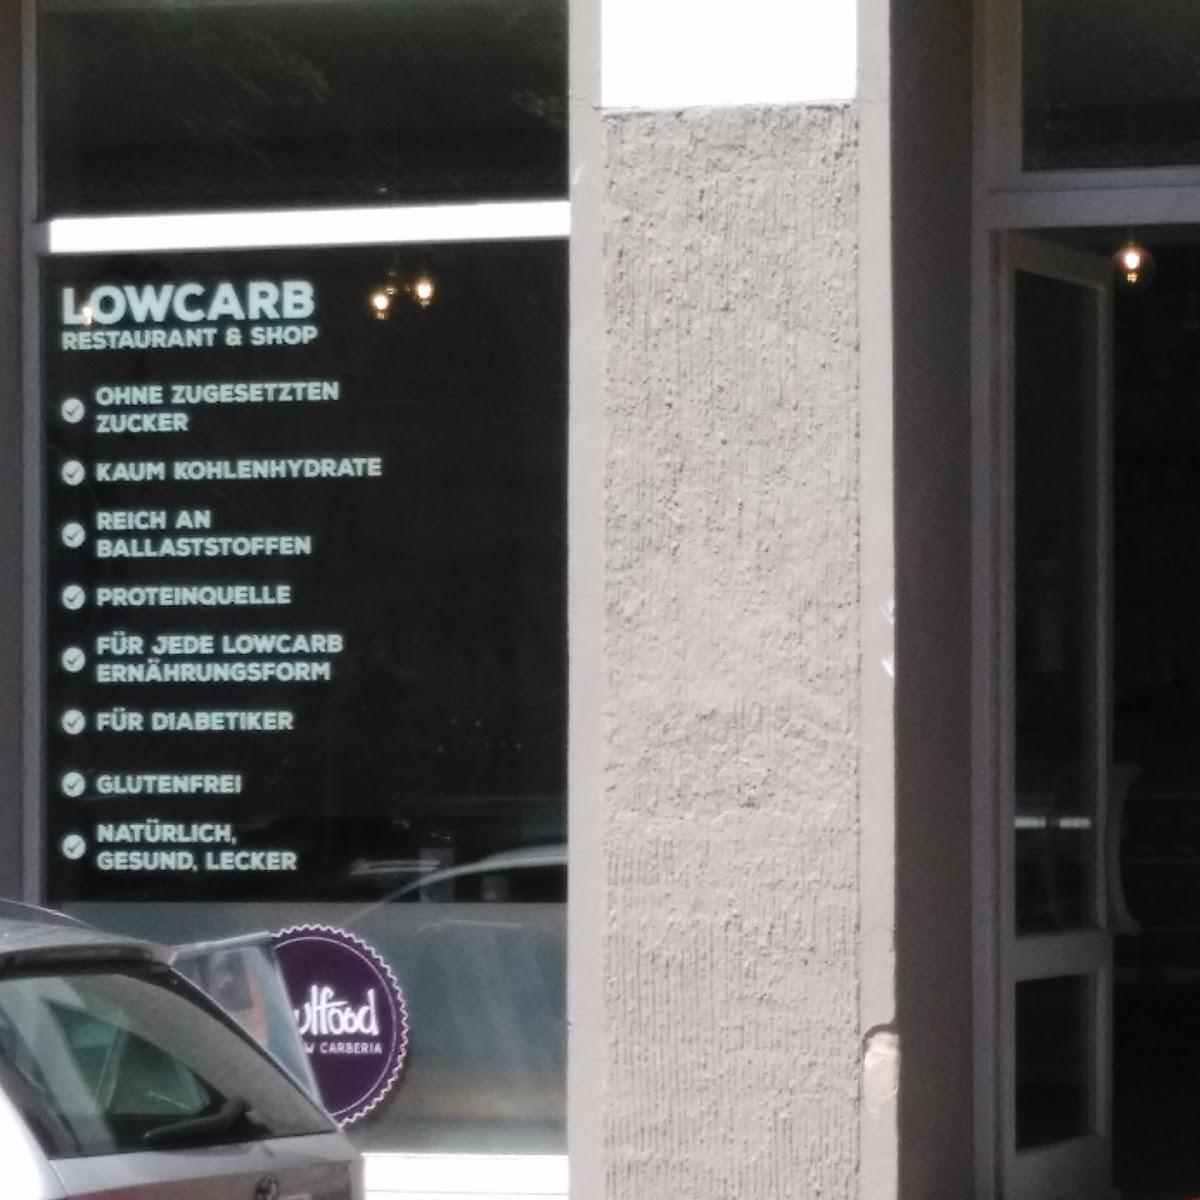 Restaurant "Soulfood LowCarberia Onlineshop für LowCarb & Keto Brot, Kuchen, Muffins & Donuts" in Nürnberg